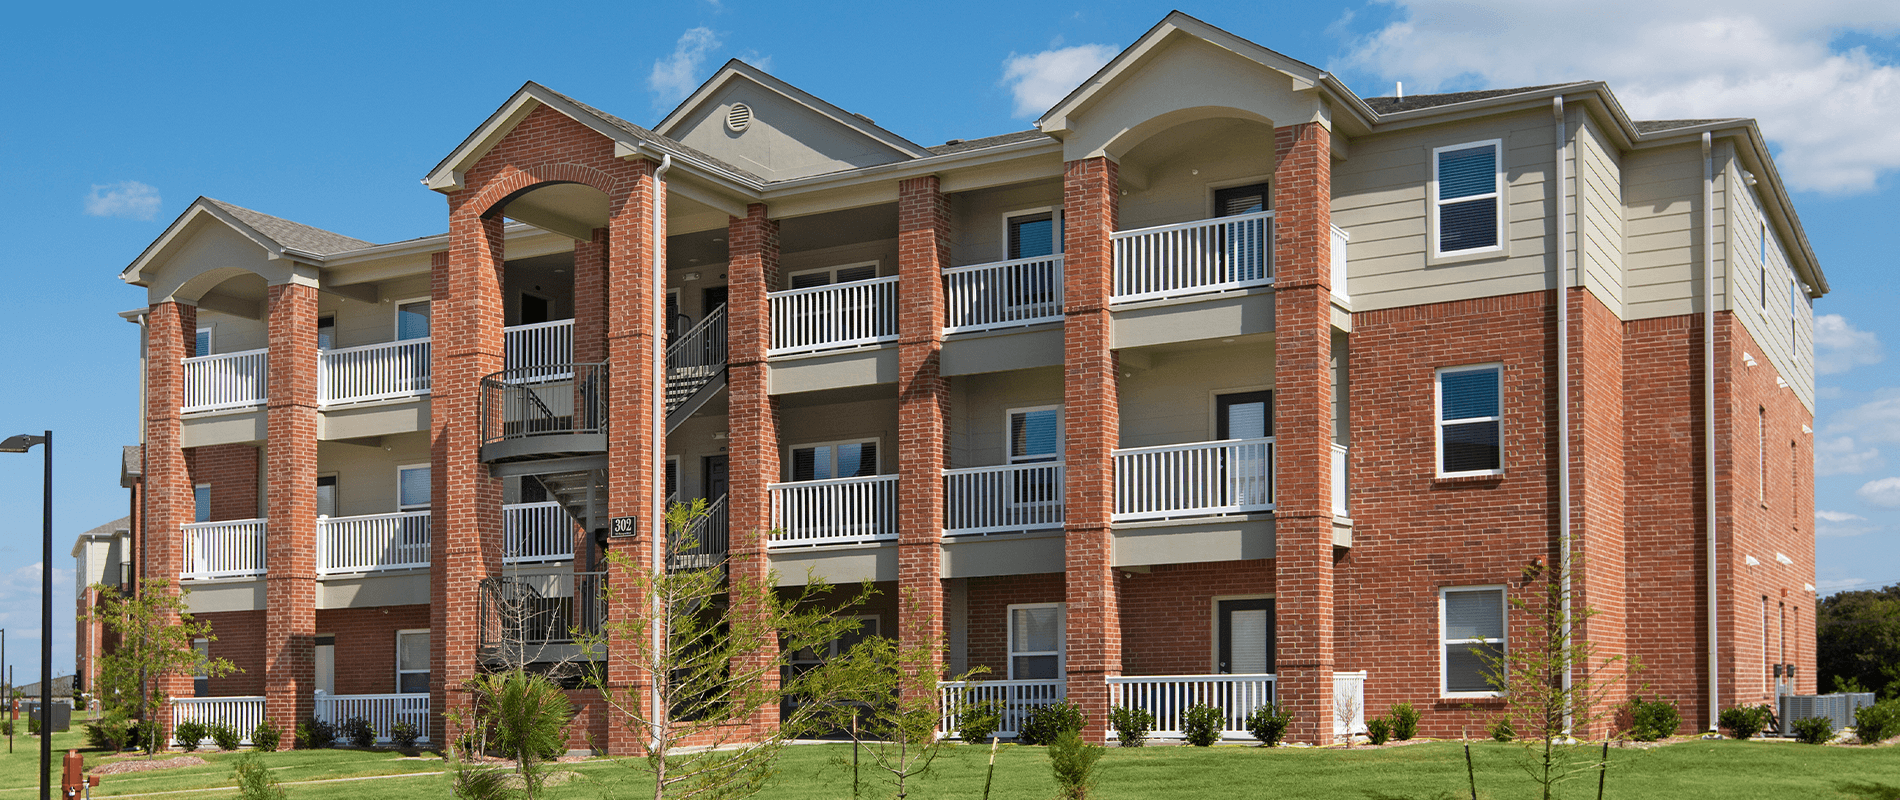 an exterior view of a brick apartment building with balconies